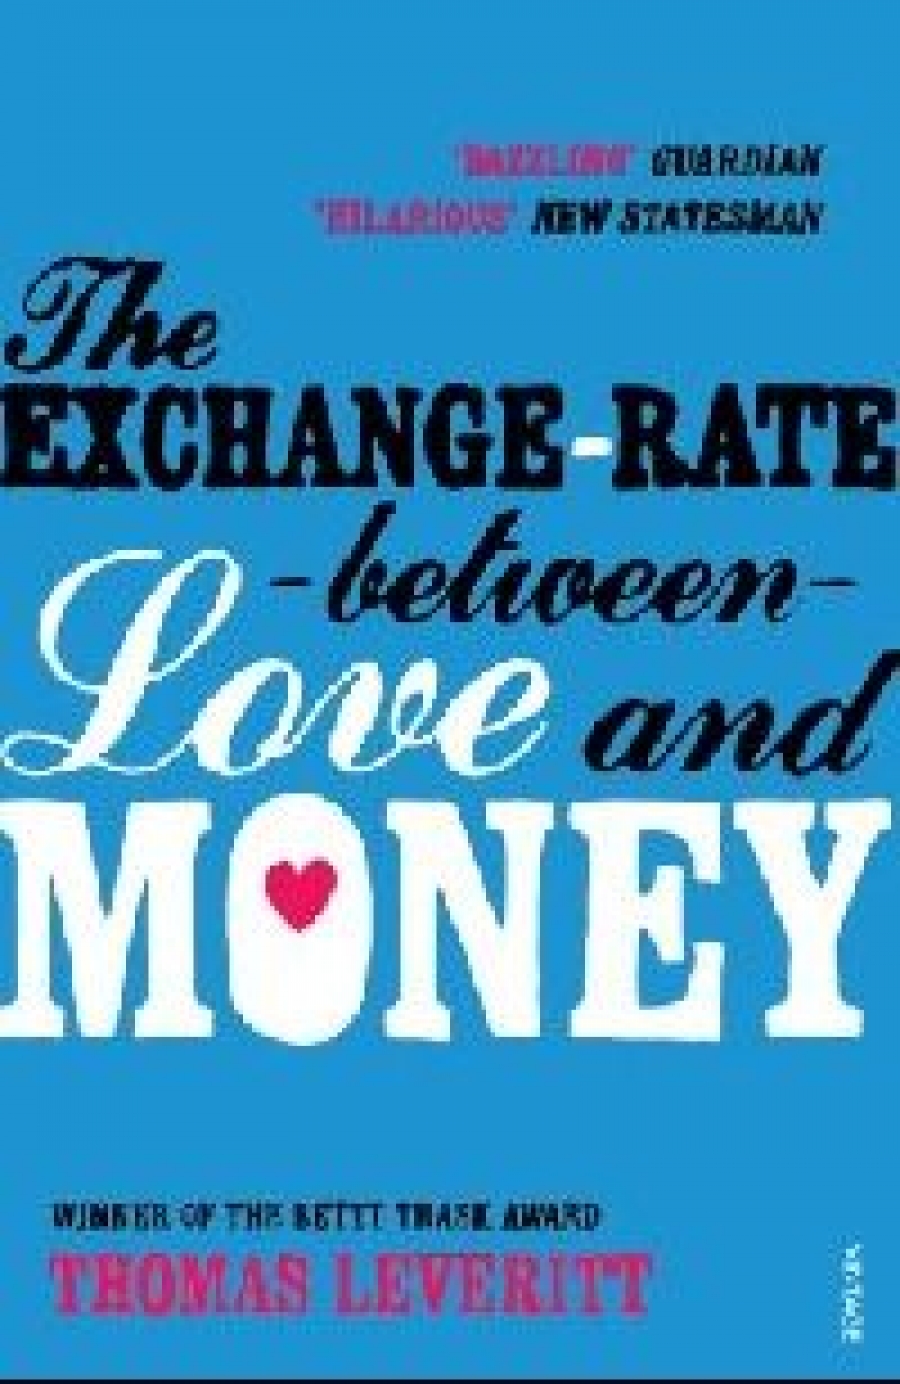 Thomas, Leveritt Exchange-Rate Between Love and Money, The 